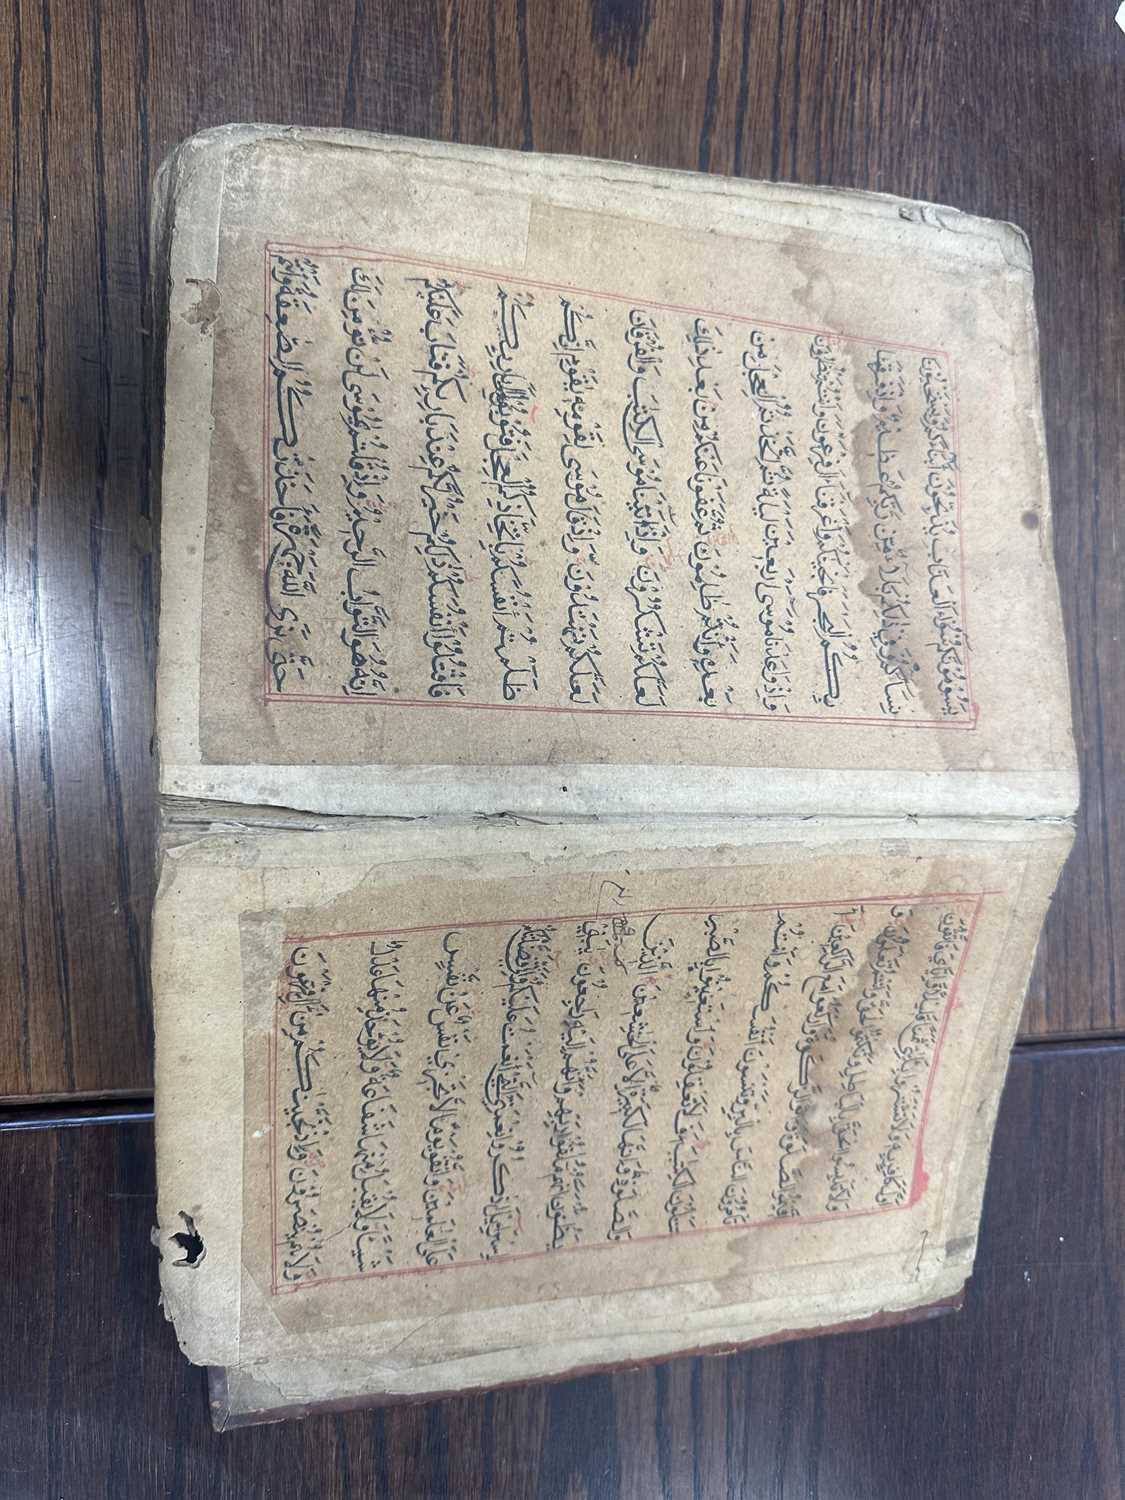 AN EARLY COPY OF THE KORAN LEATHER BOUND BOOK - Image 7 of 44